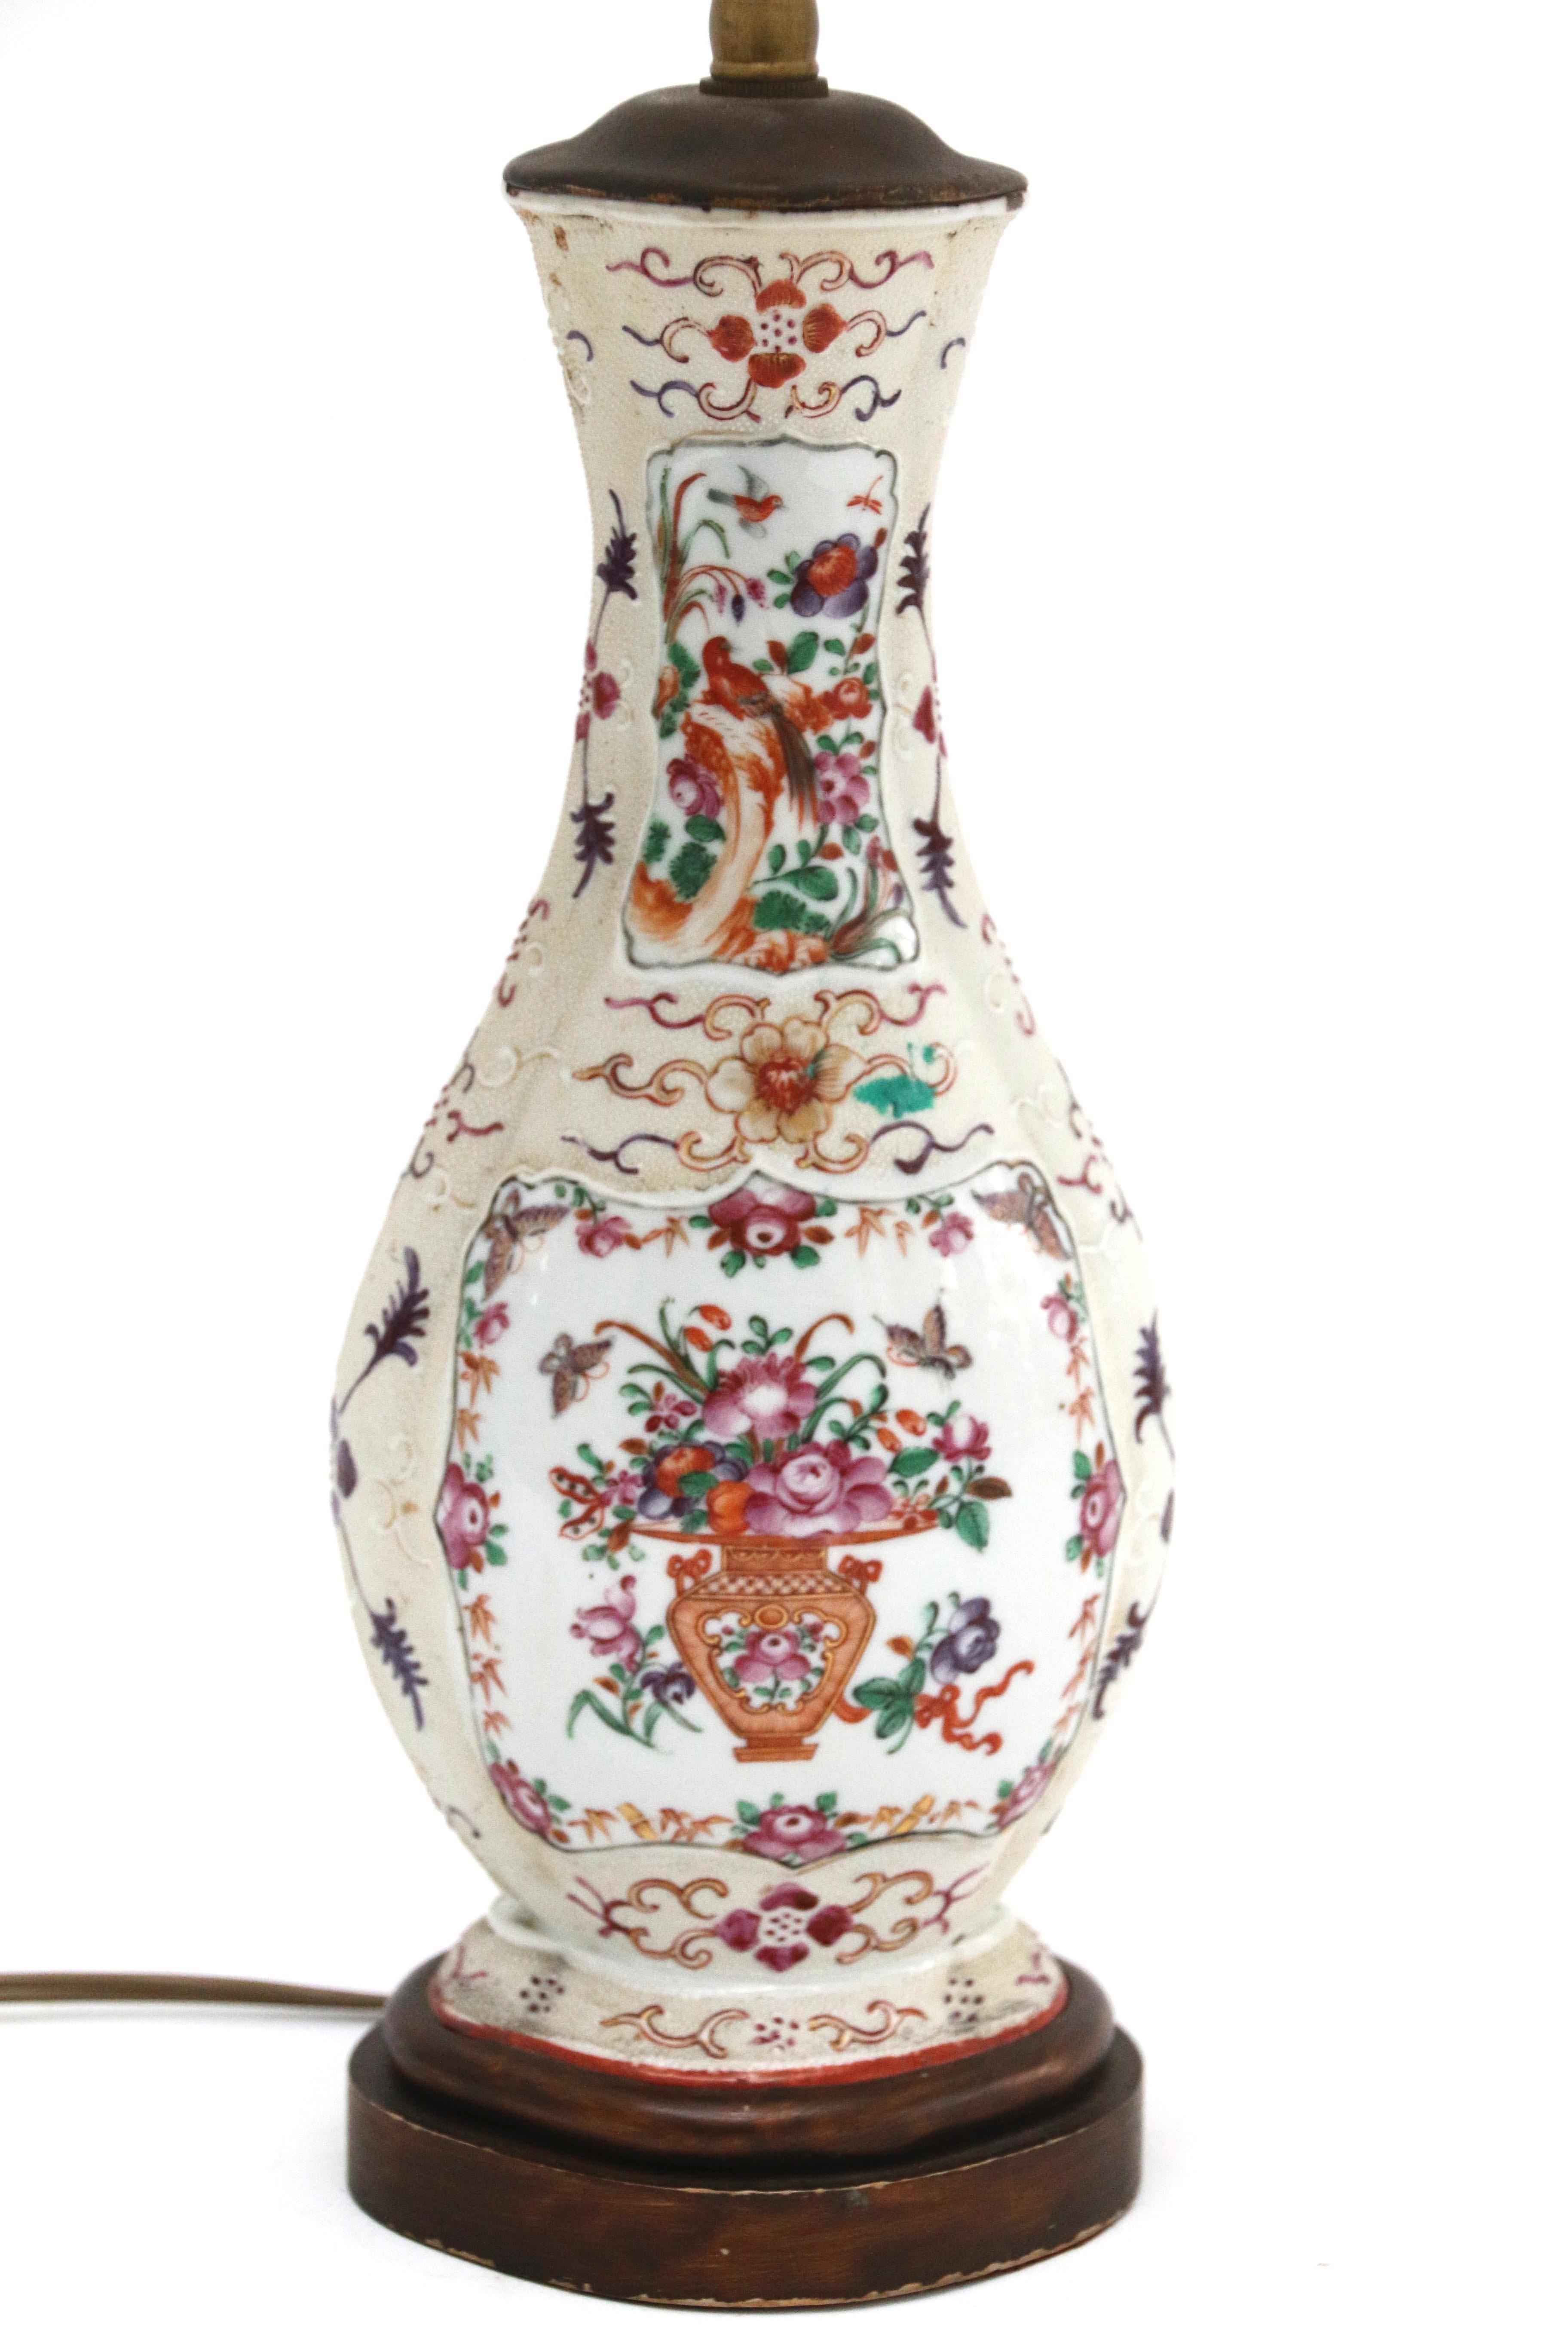 18th century Chinese export porcelain vase later fitted as a lamp and placed on wooden base. Predominantly red, purple and pink floral design on cream background. Vase is 11